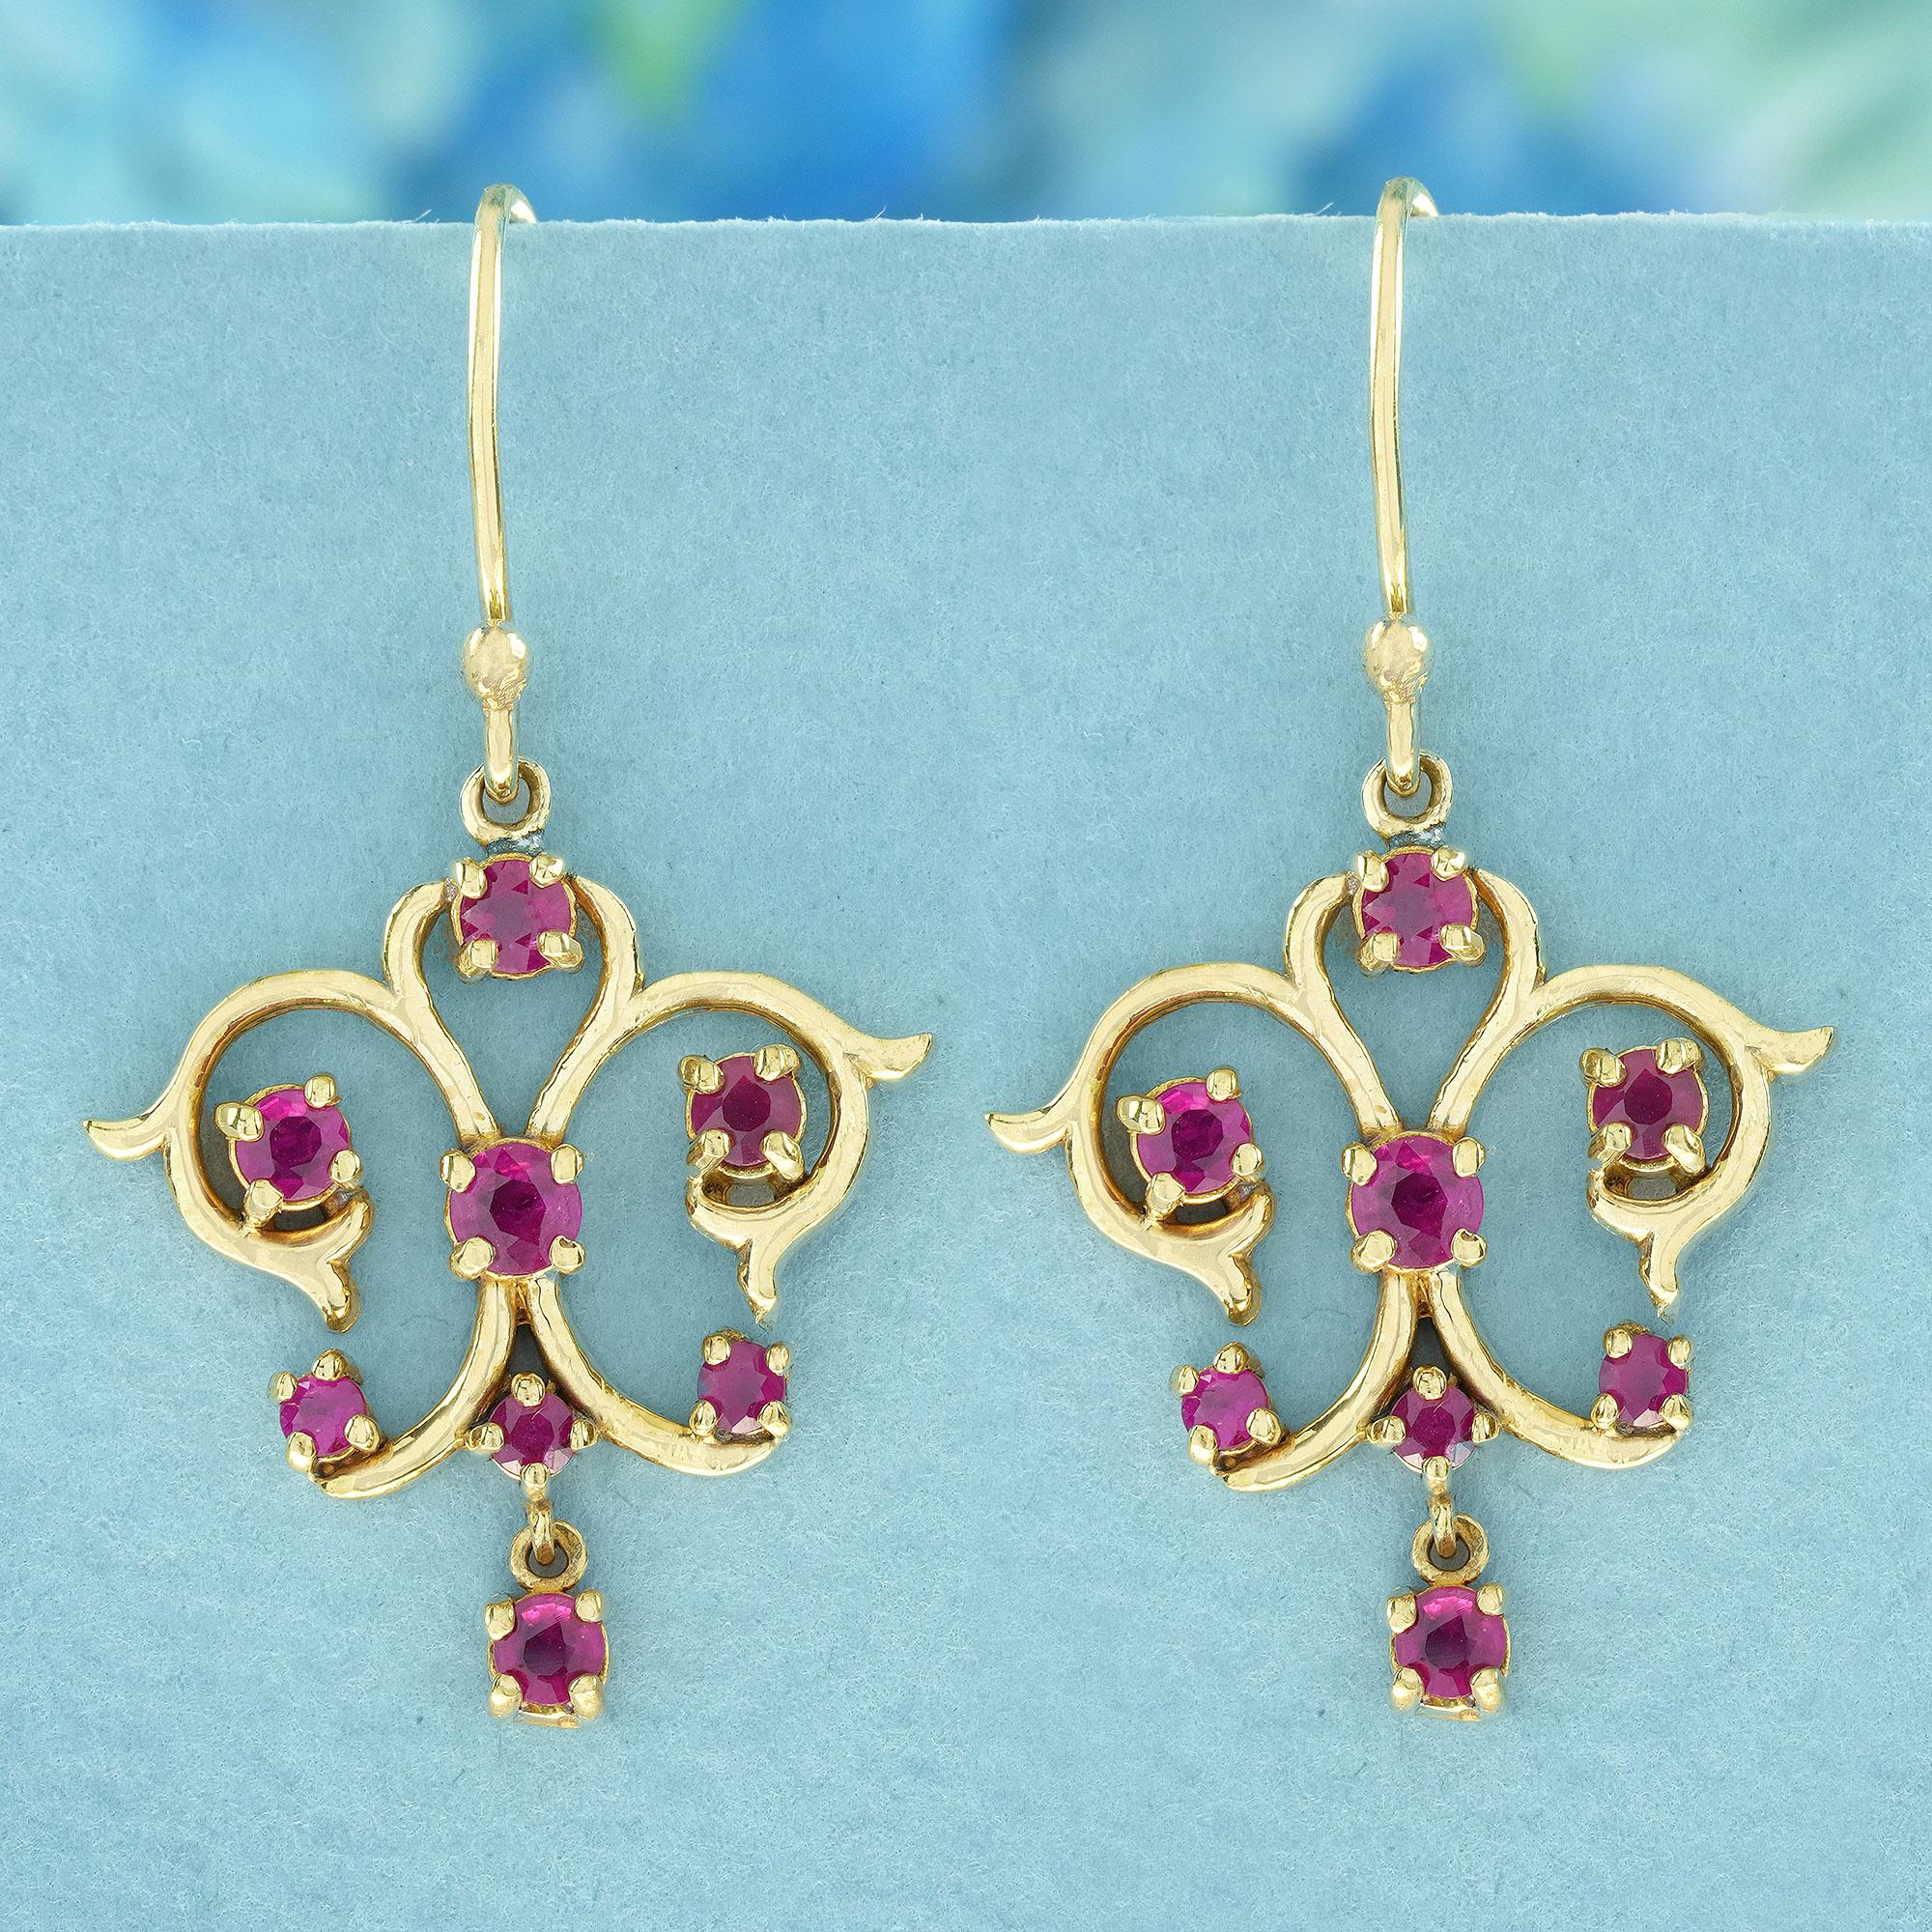 Embrace timeless elegance with these captivating dangle earrings. Each earring features a stunning round ruby nestled in delicate golden scrollwork, evoking a sense of vintage glamour and lasting sophistication.
Whether you're wearing them for a